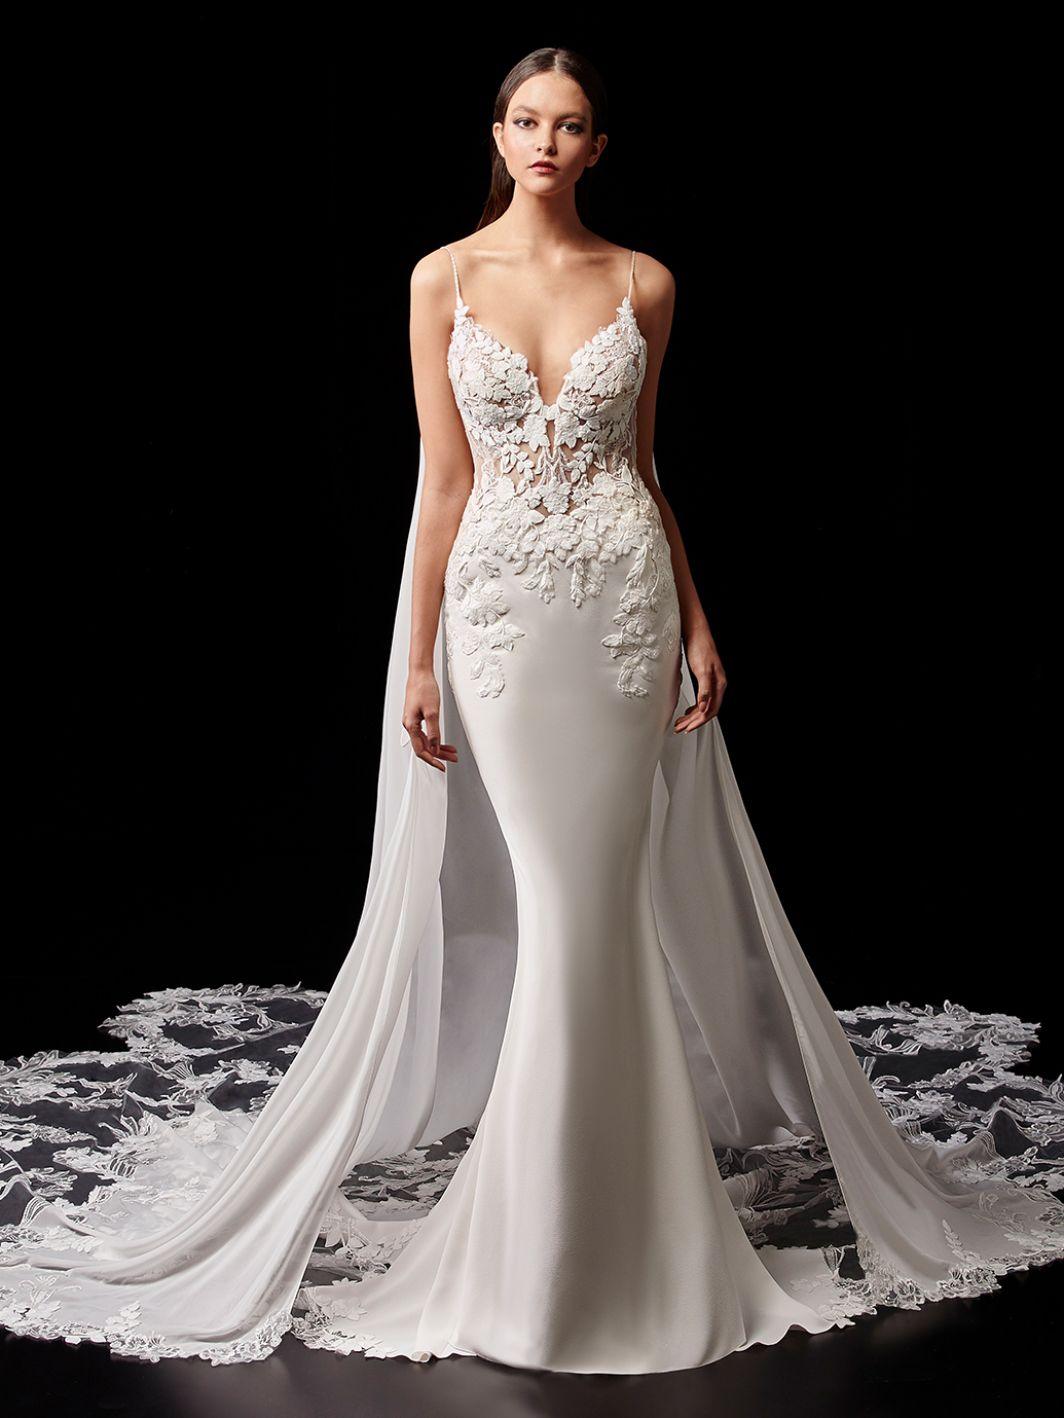 Pearl, Enzoani, Georgette Gown with Statement Lace Train